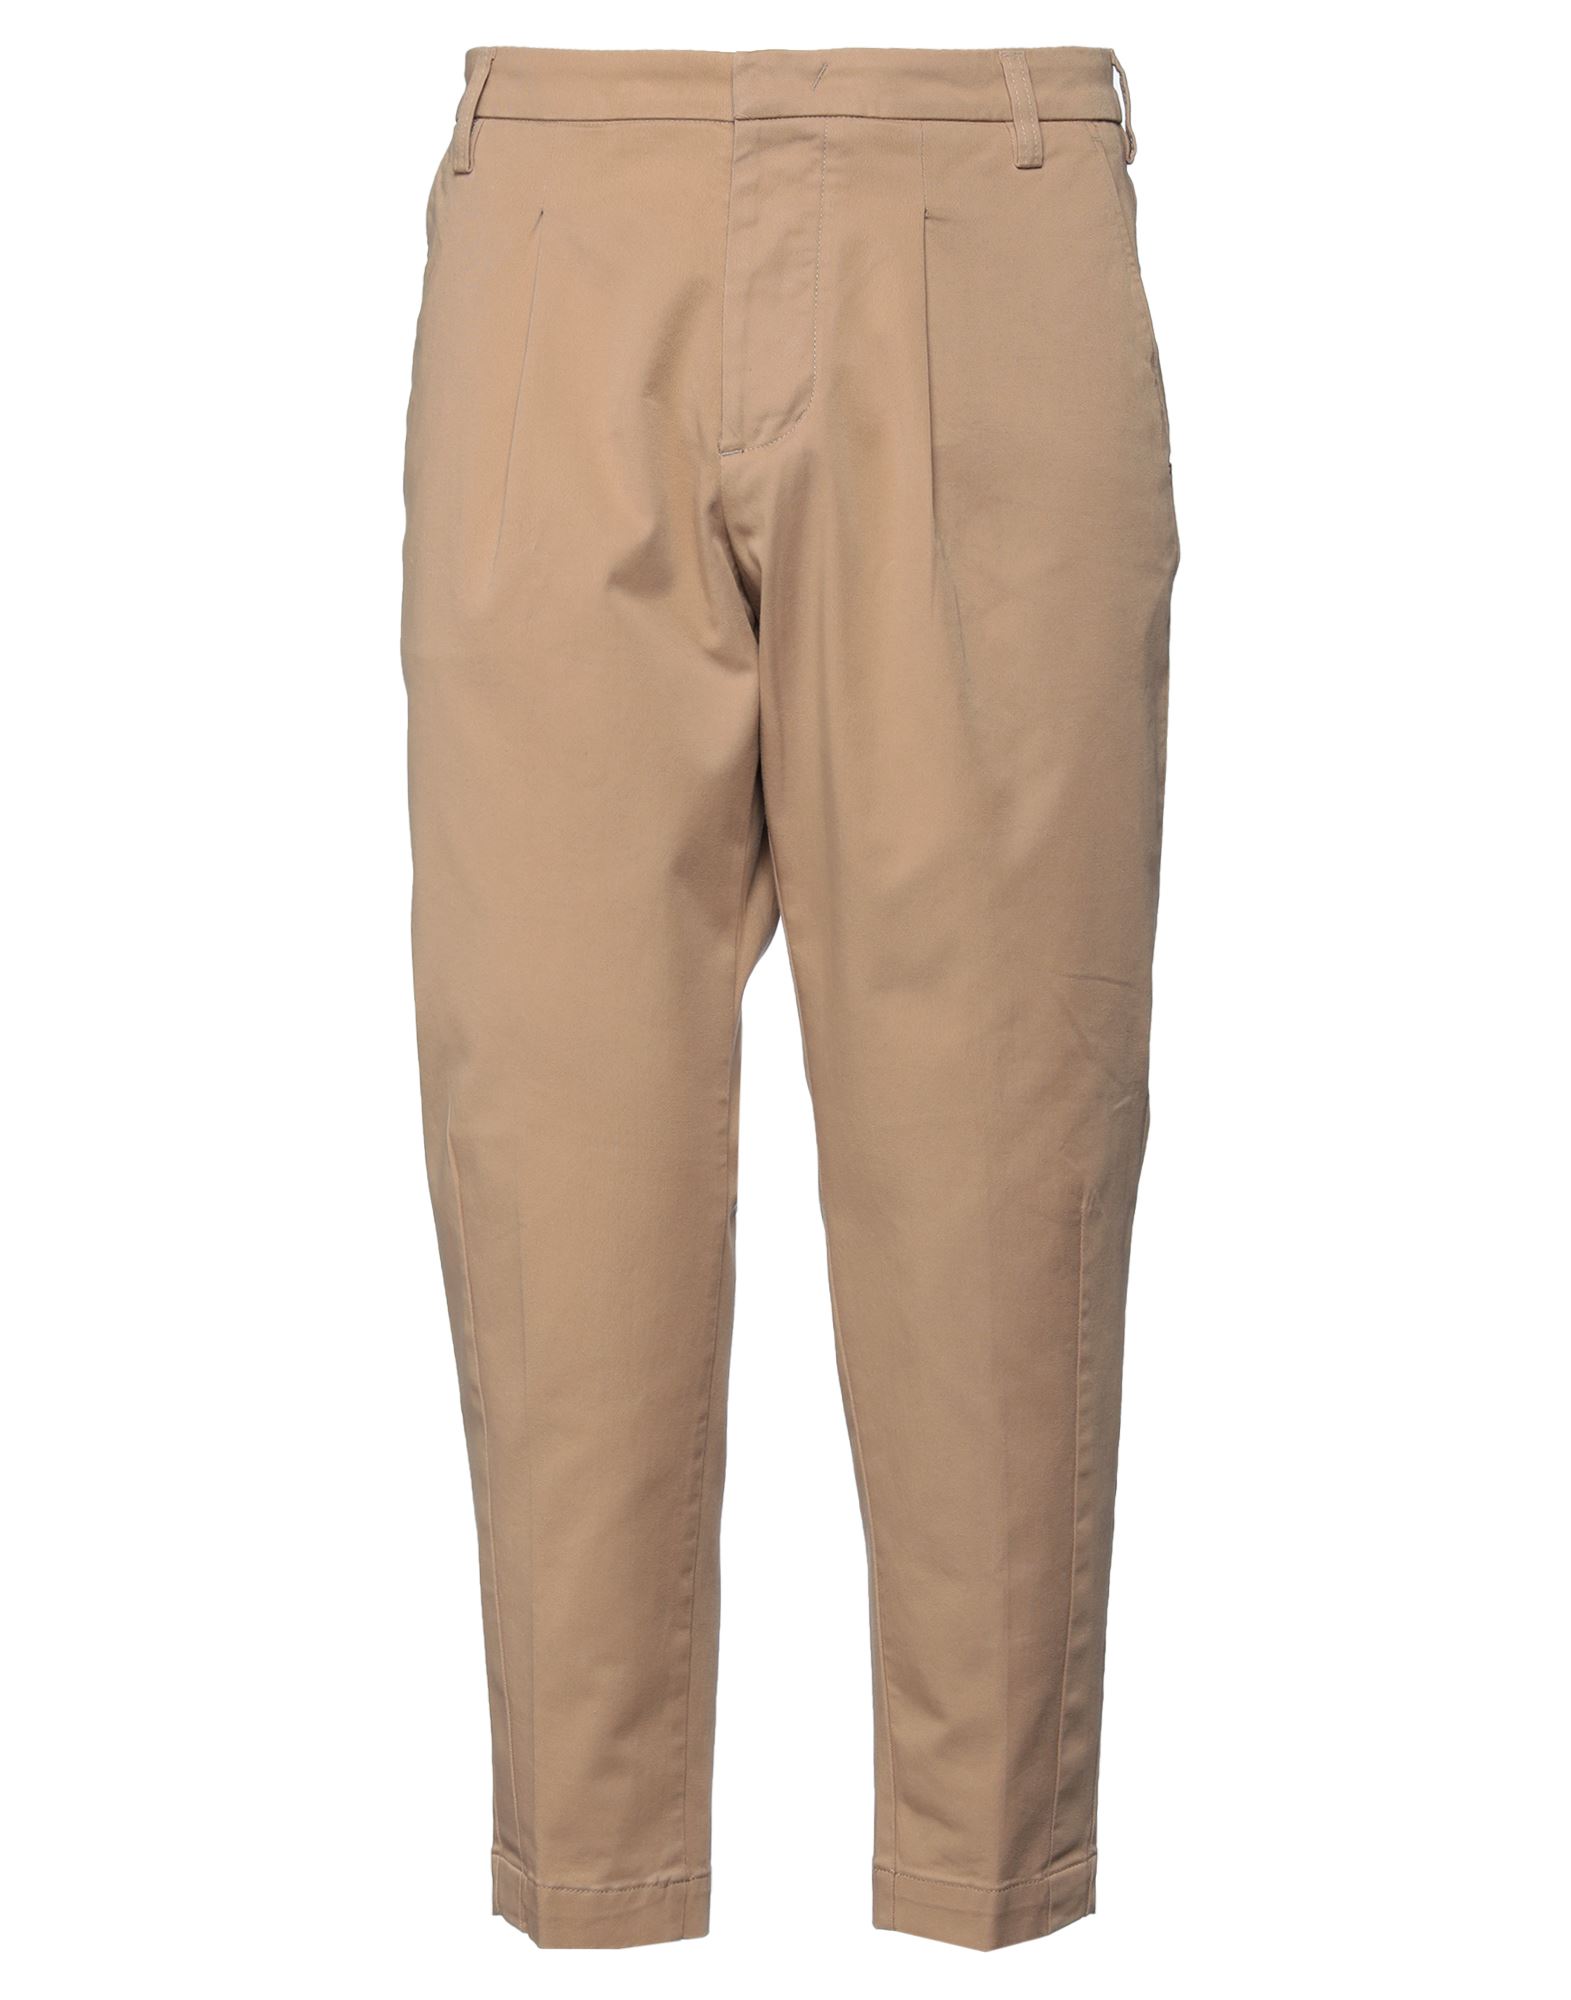 Entre Amis Cropped Pants In Beige